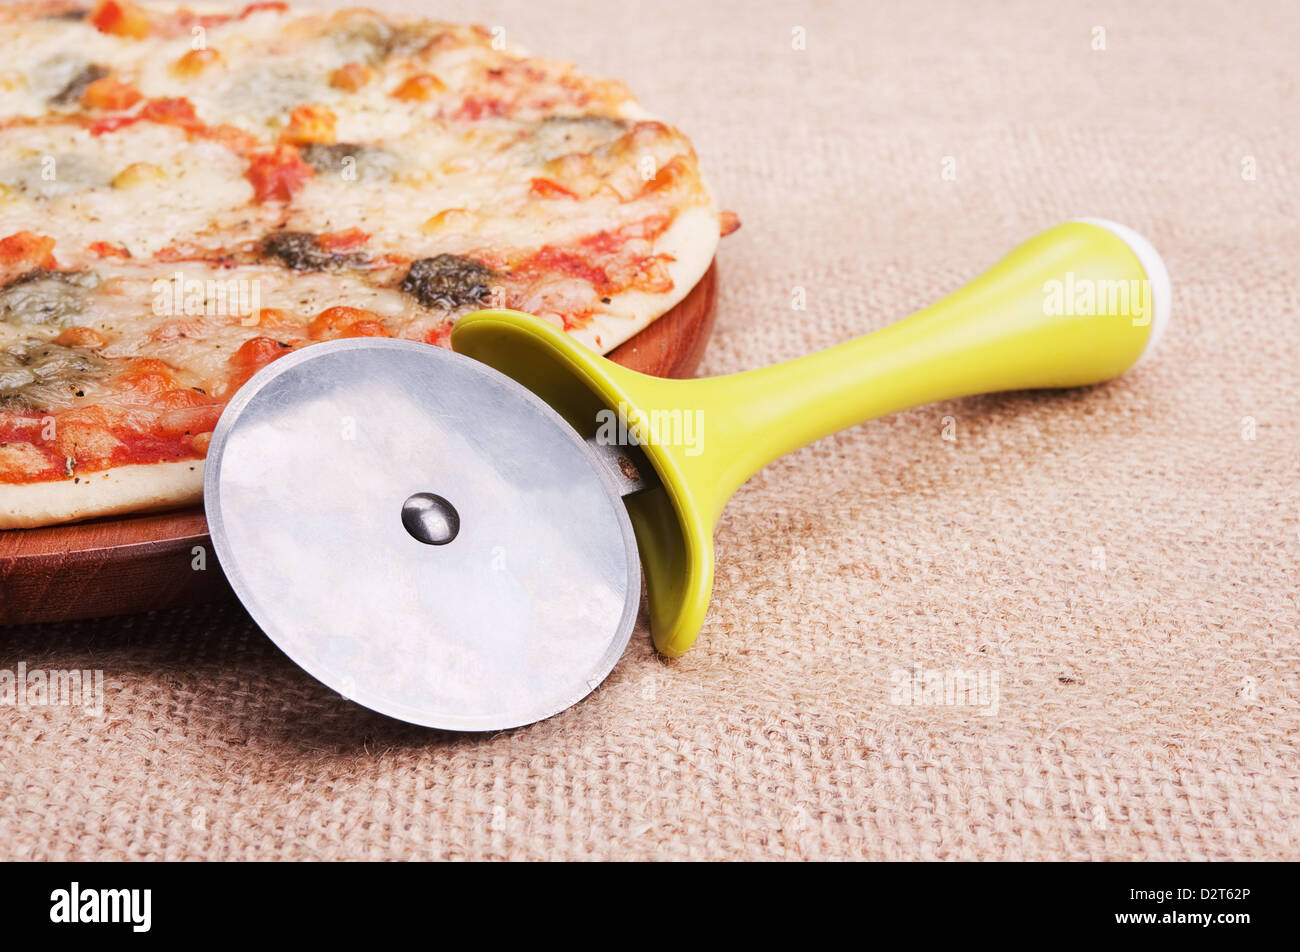 Pizza mozzarella with a knife on the table Stock Photo